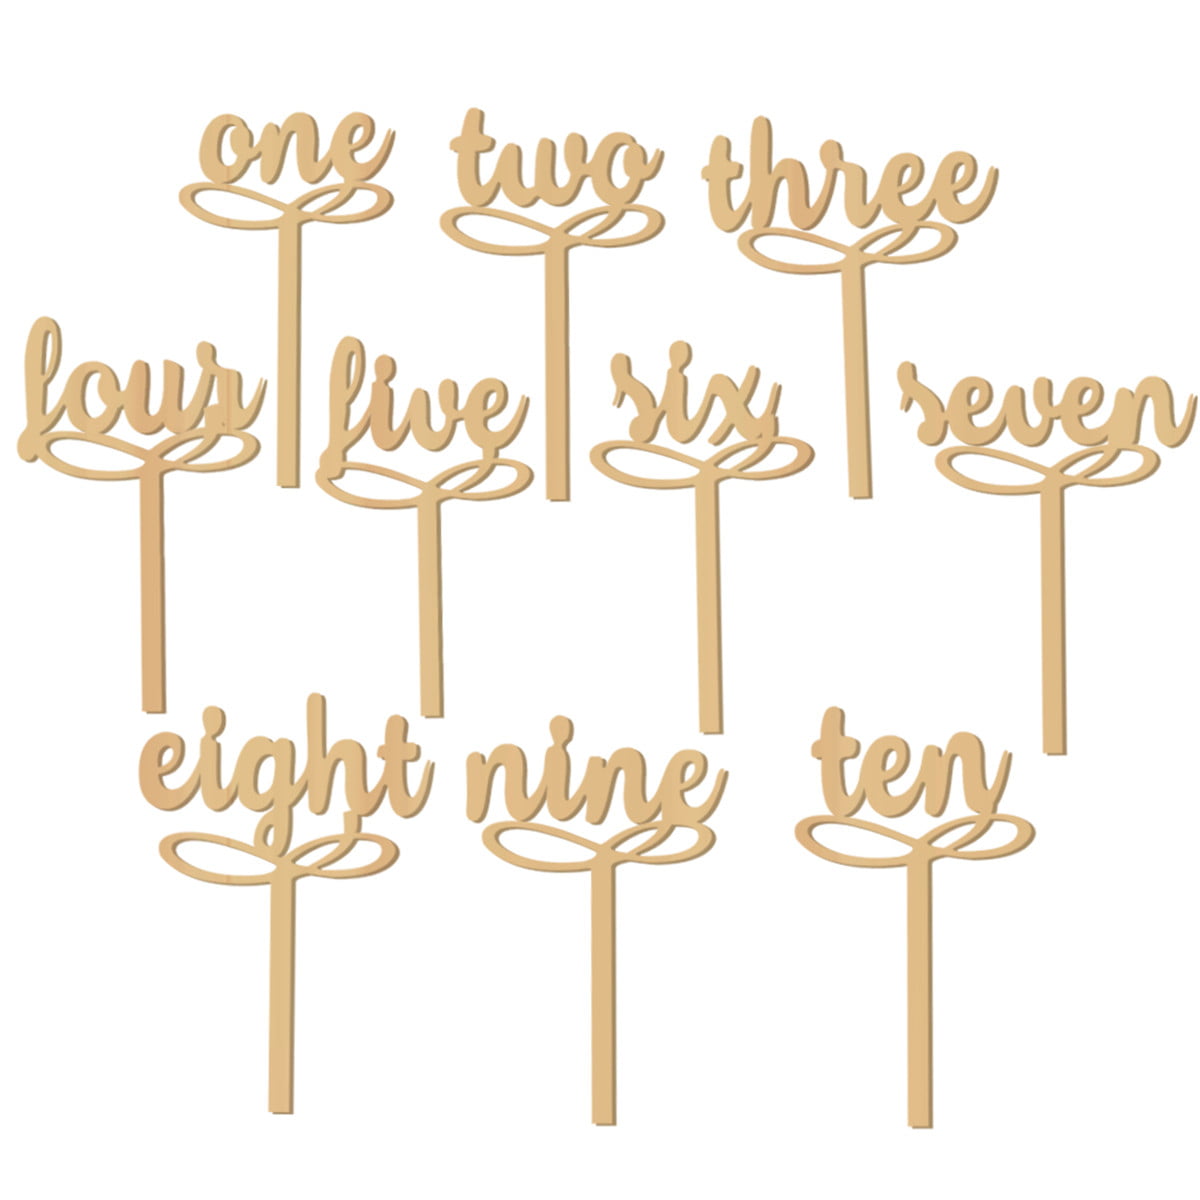 Set of 15 Freestanding wedding wooden table numbers with round base/sticks 